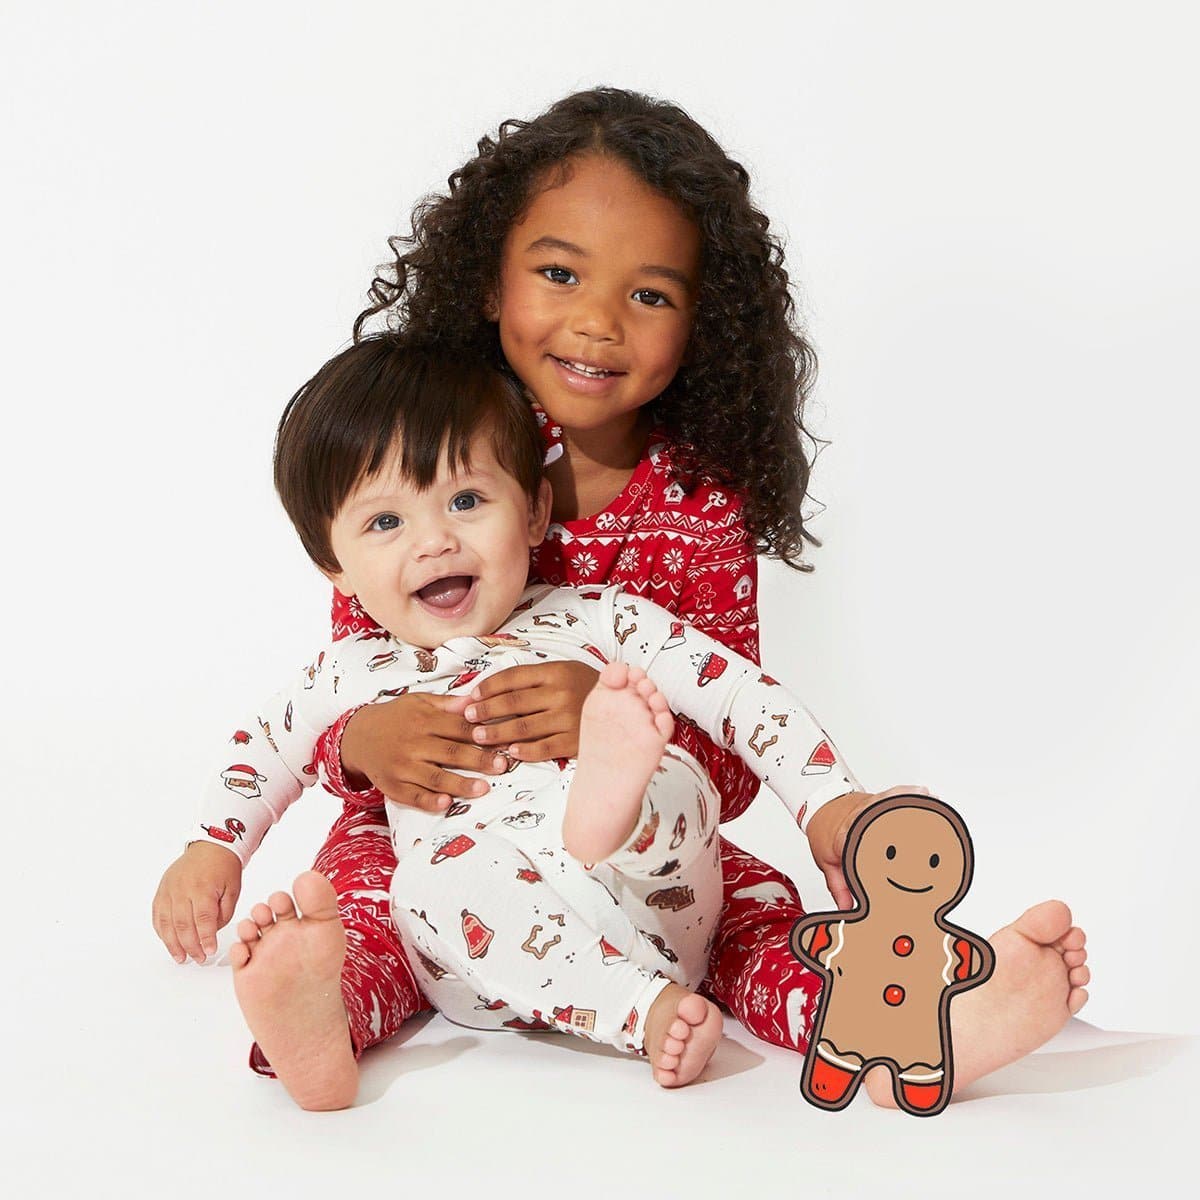 Winterberry Holiday Bundle - Bamboo Convertible Footie